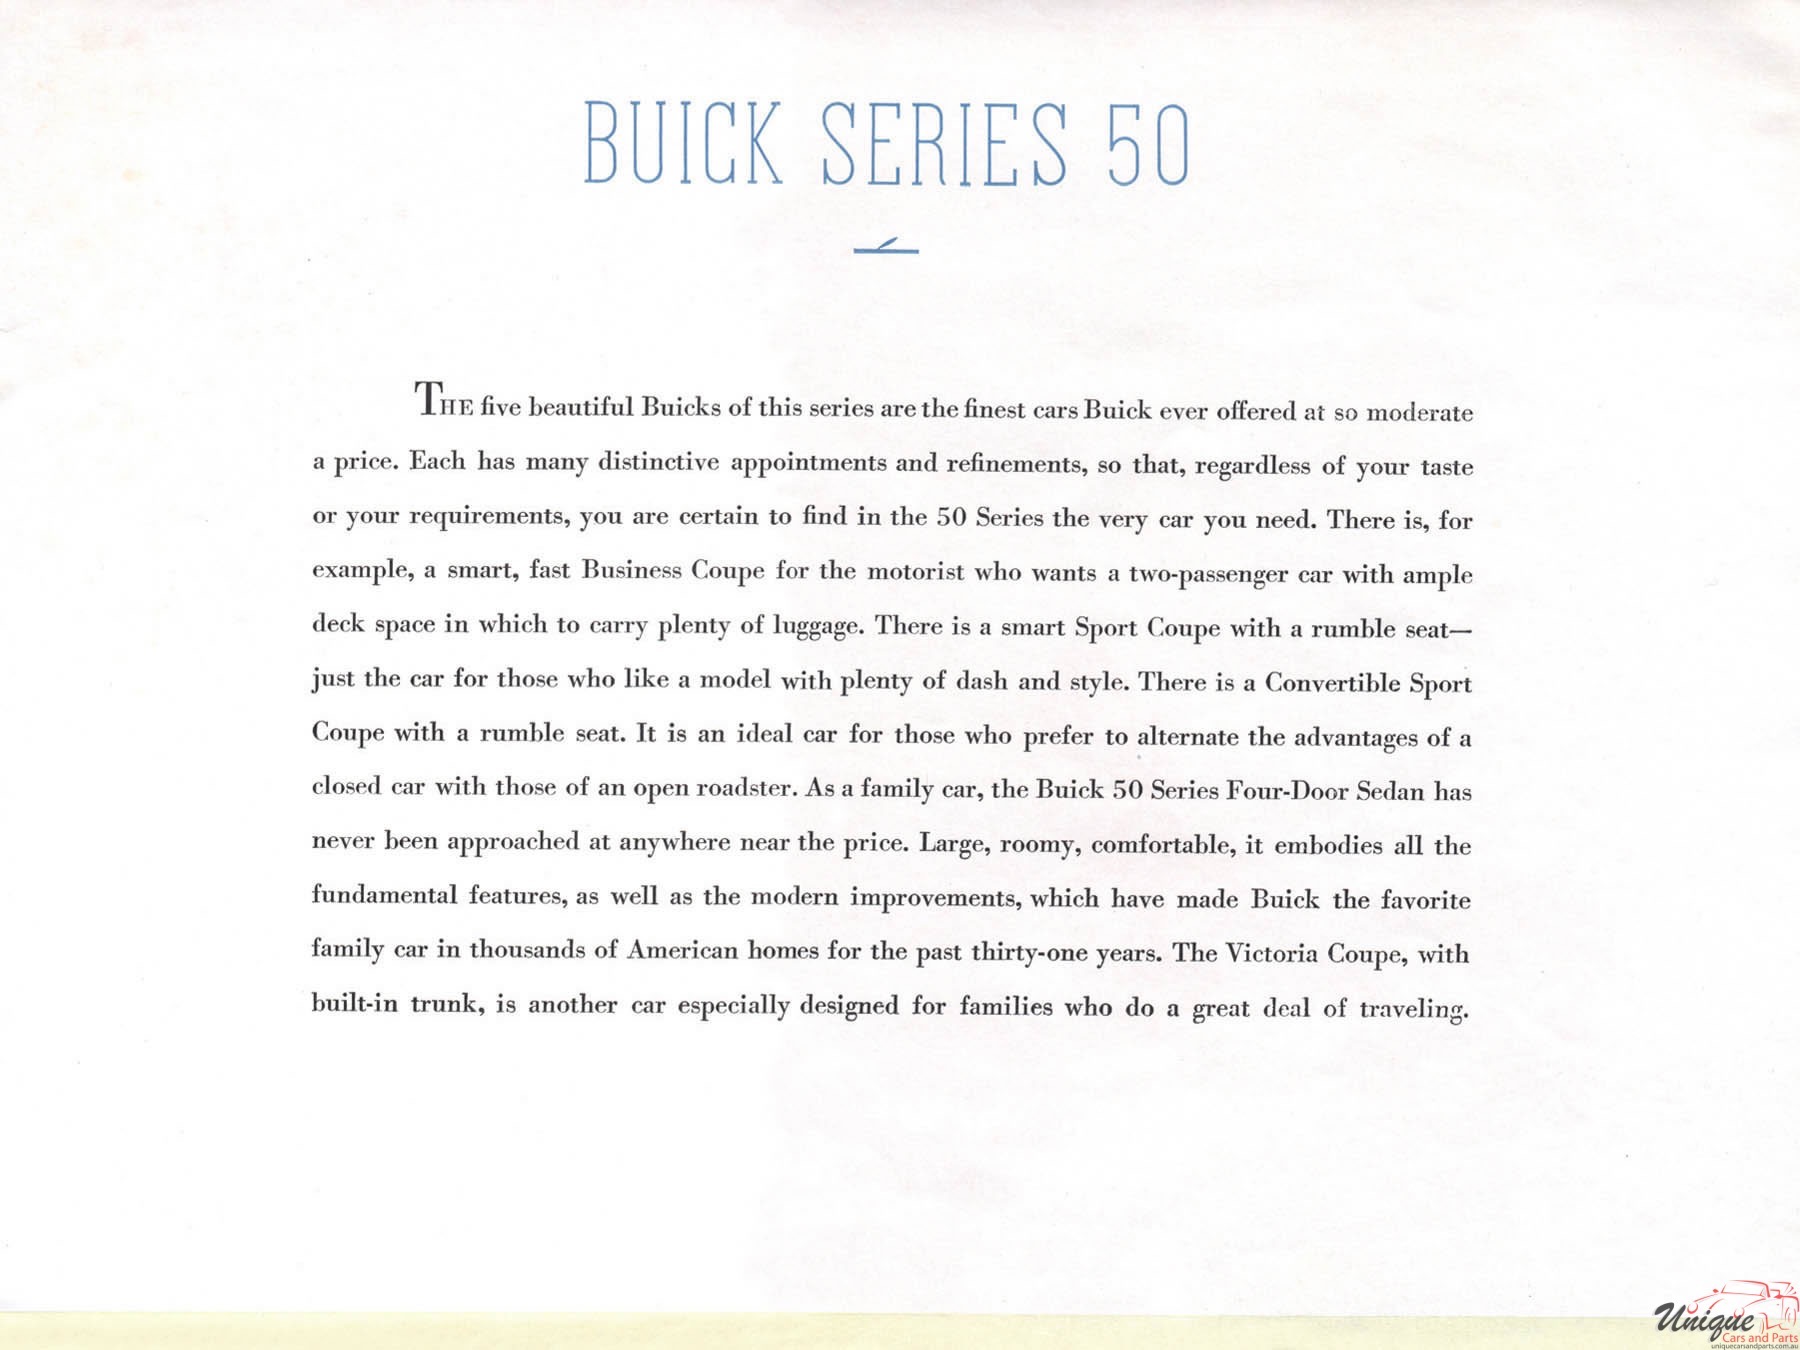 1935 Buick Brochure Page 15